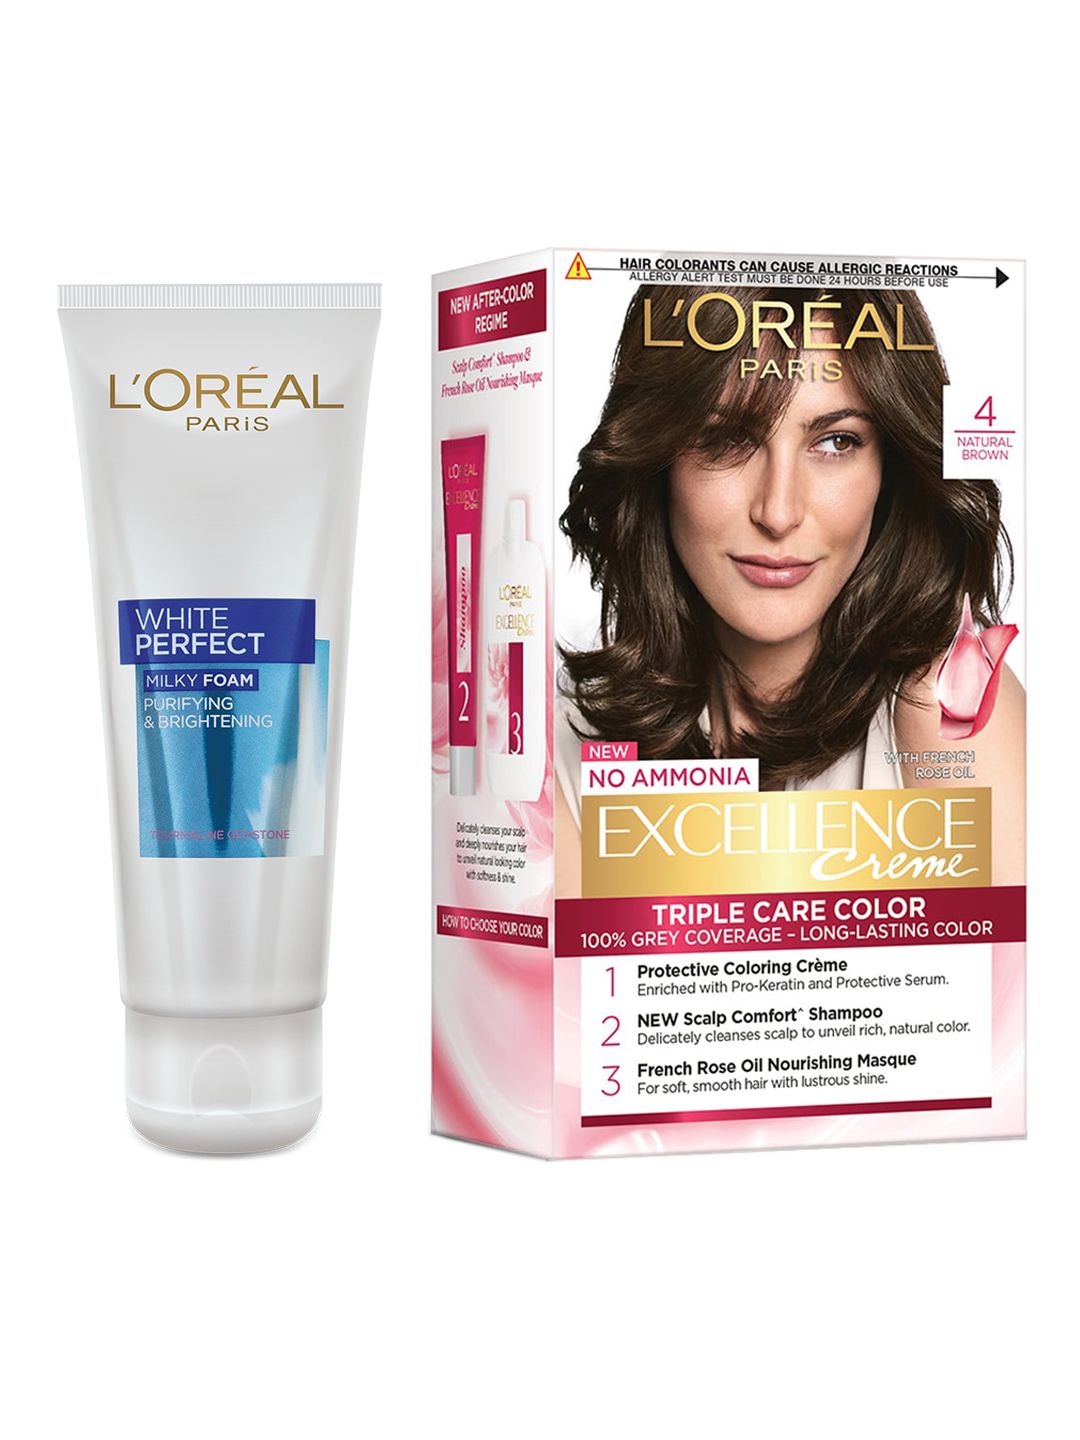 LOreal Paris Excellence Hair Colour - Natural Brown & White Perfect Facial Foam Price in India